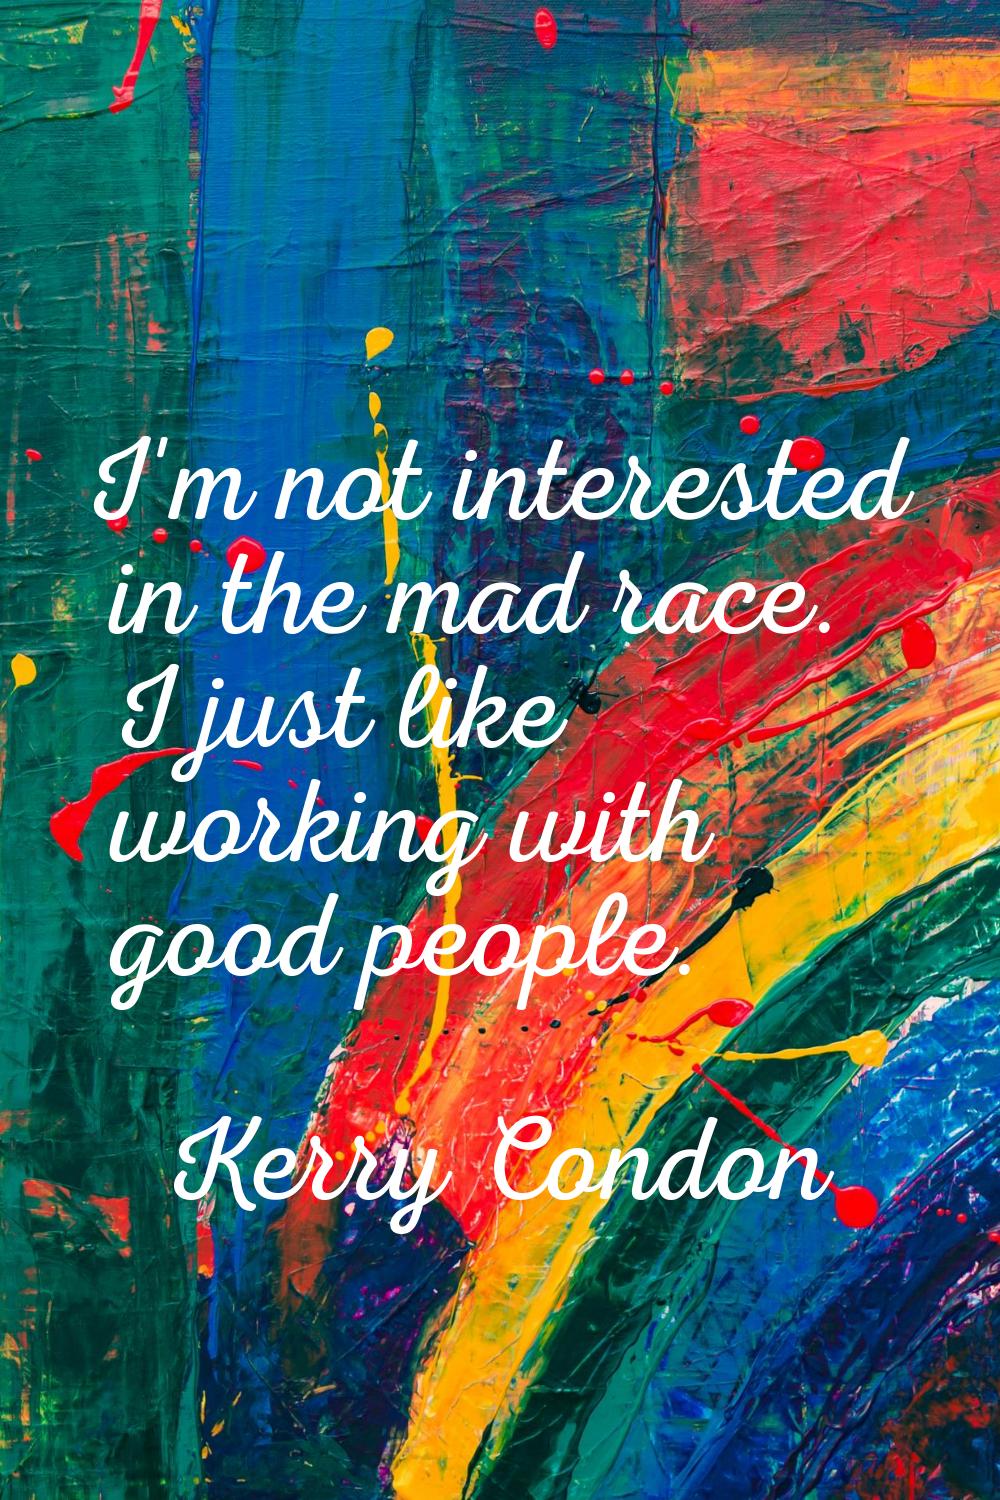 I'm not interested in the mad race. I just like working with good people.